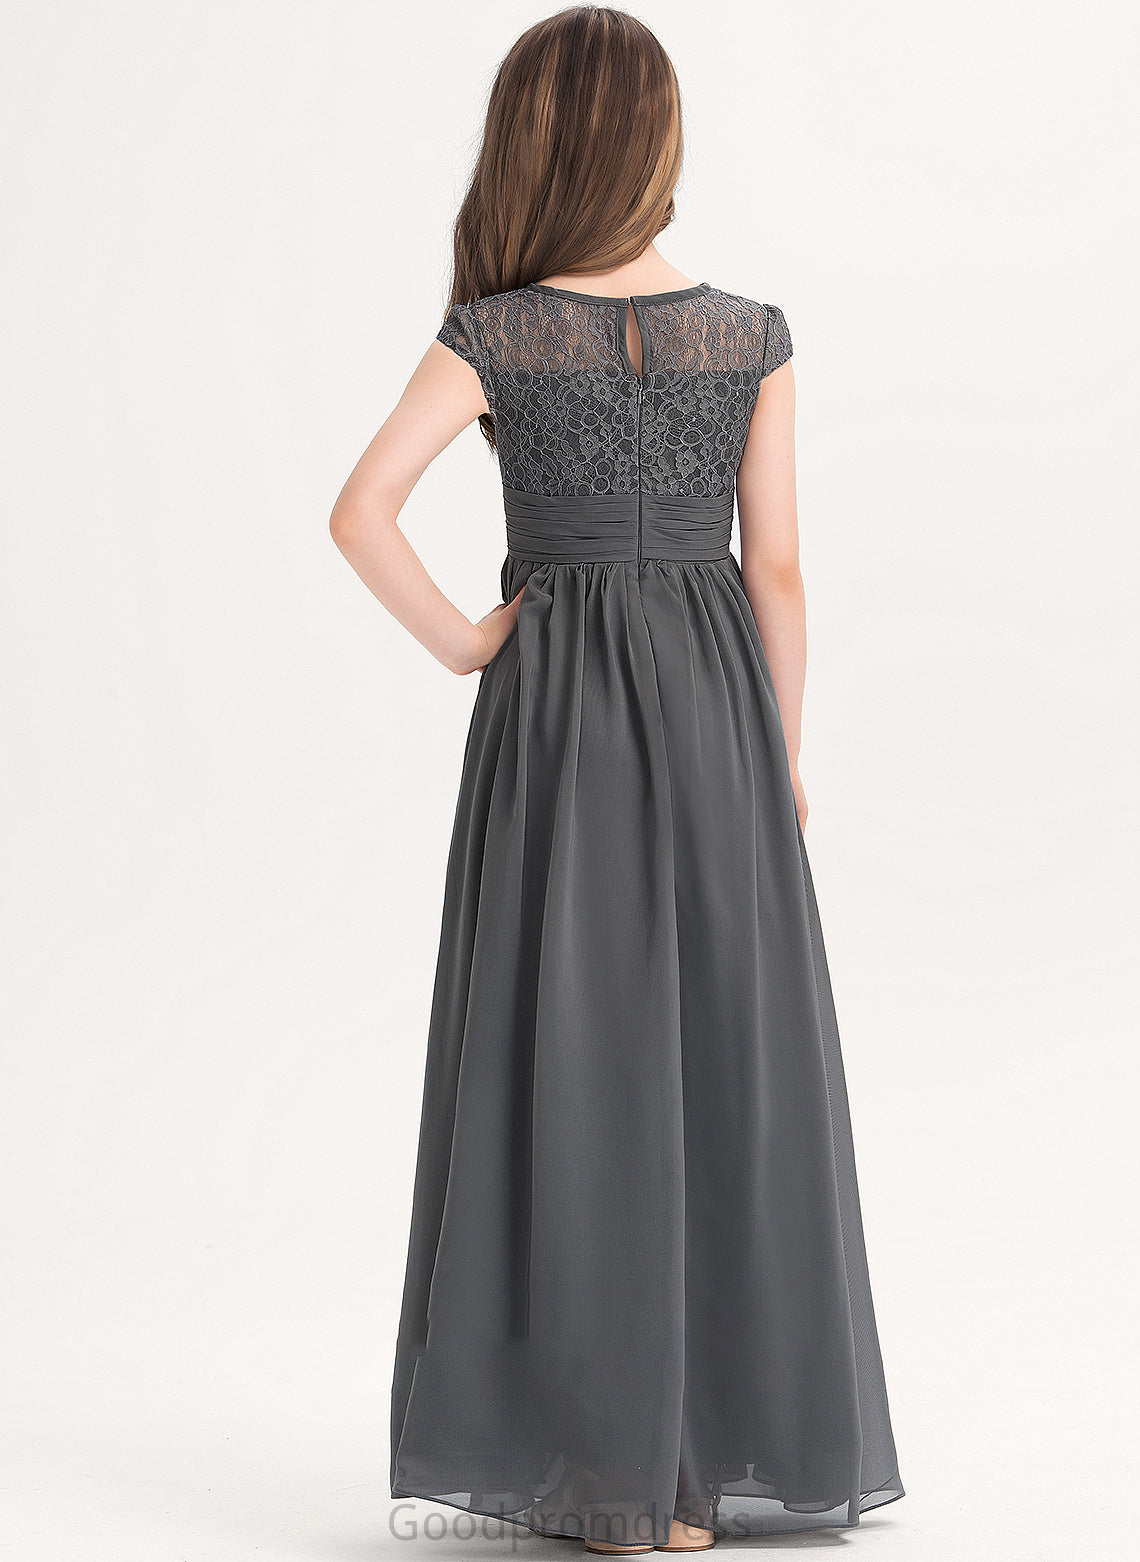 Lace Junior Bridesmaid Dresses Floor-Length A-Line With Scoop Chiffon Ruffle Mariam Neck